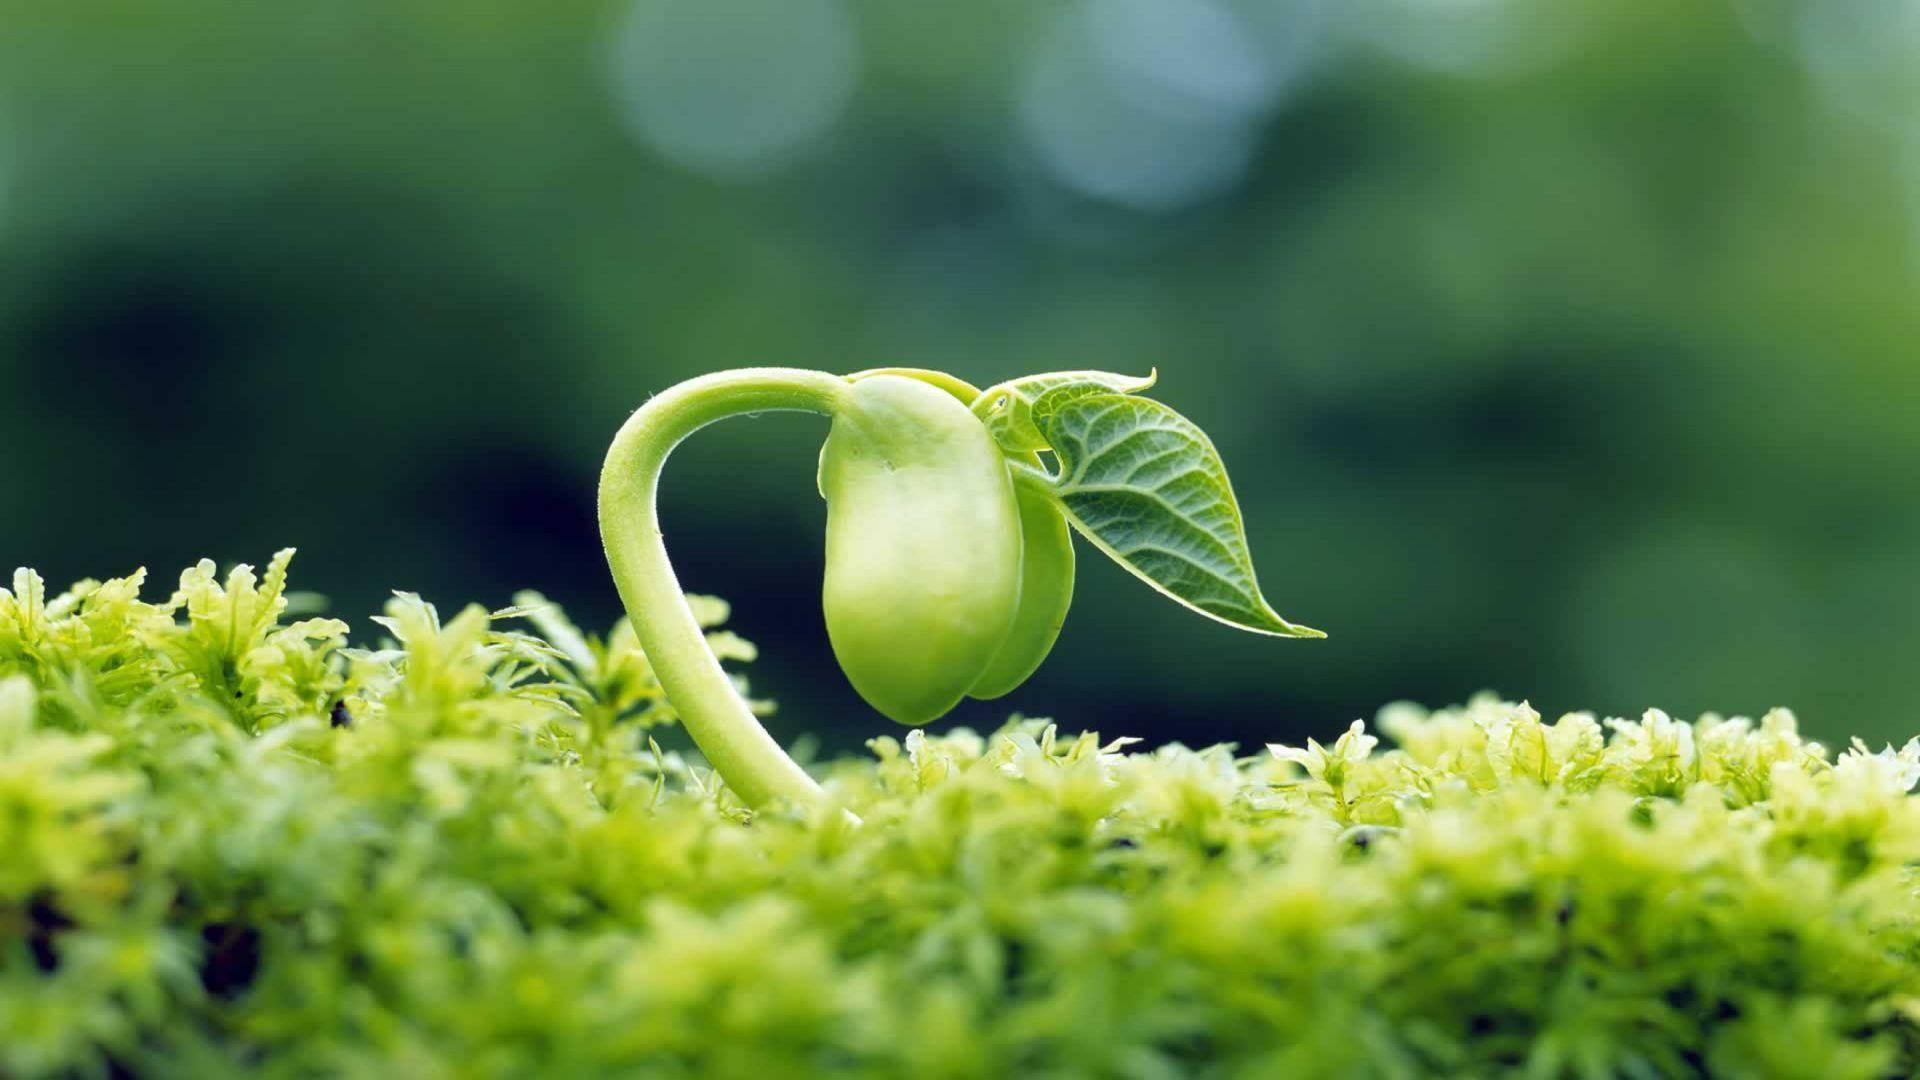 Beautiful Nature Photography Growing Seed Wallpaper